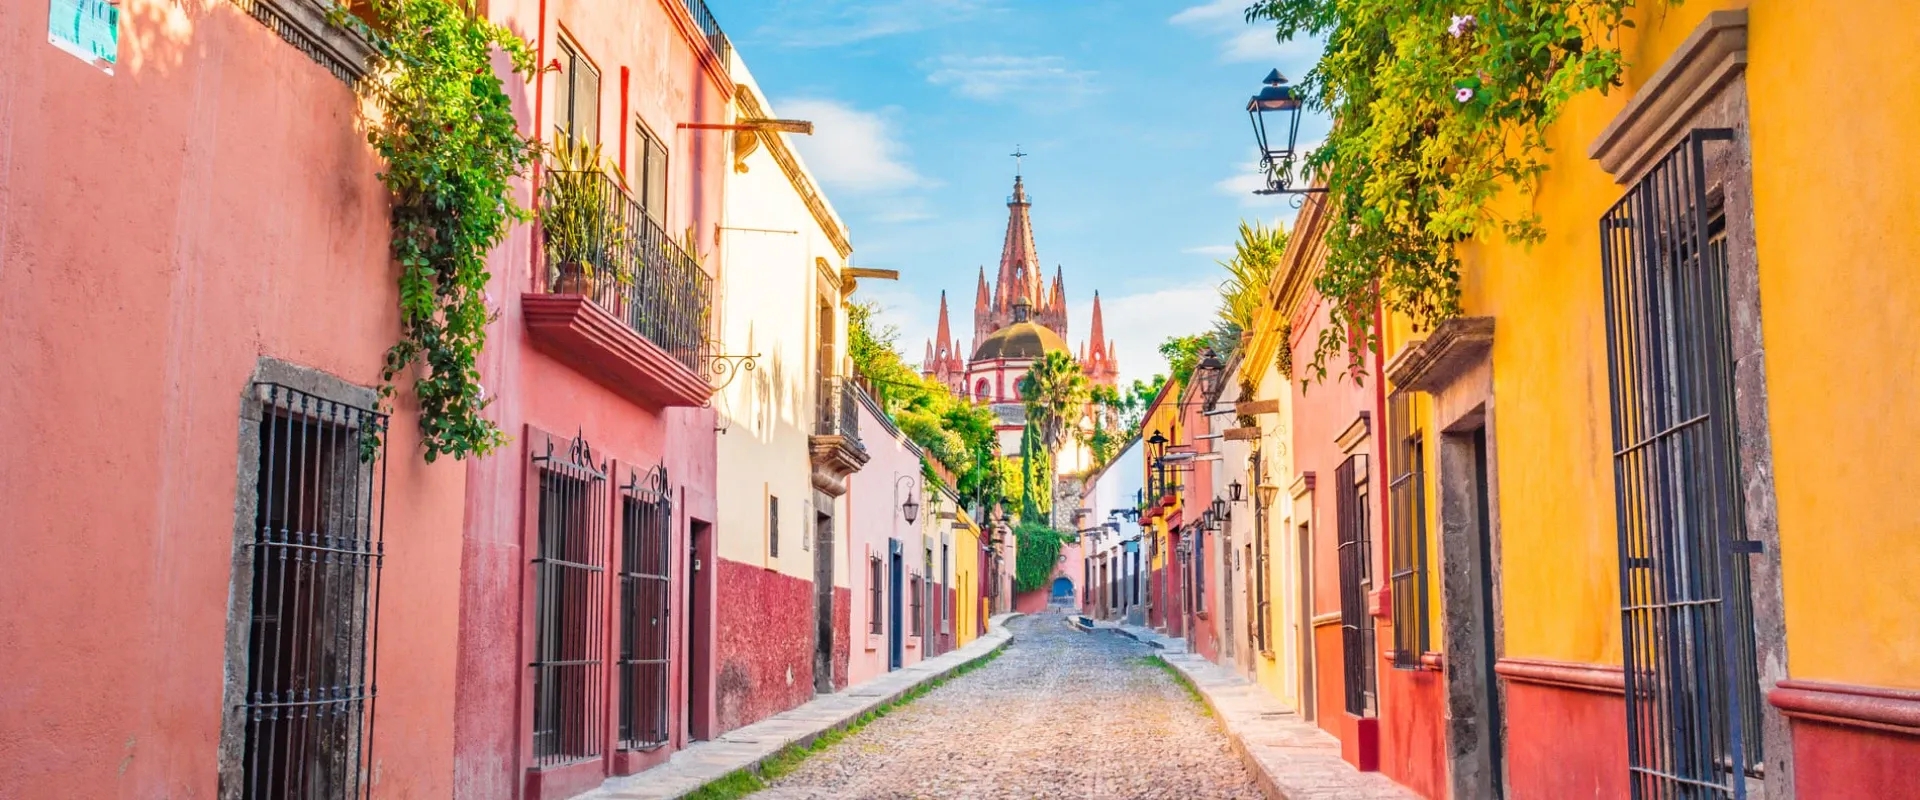 View down a colorful street in San Miguel de Allende